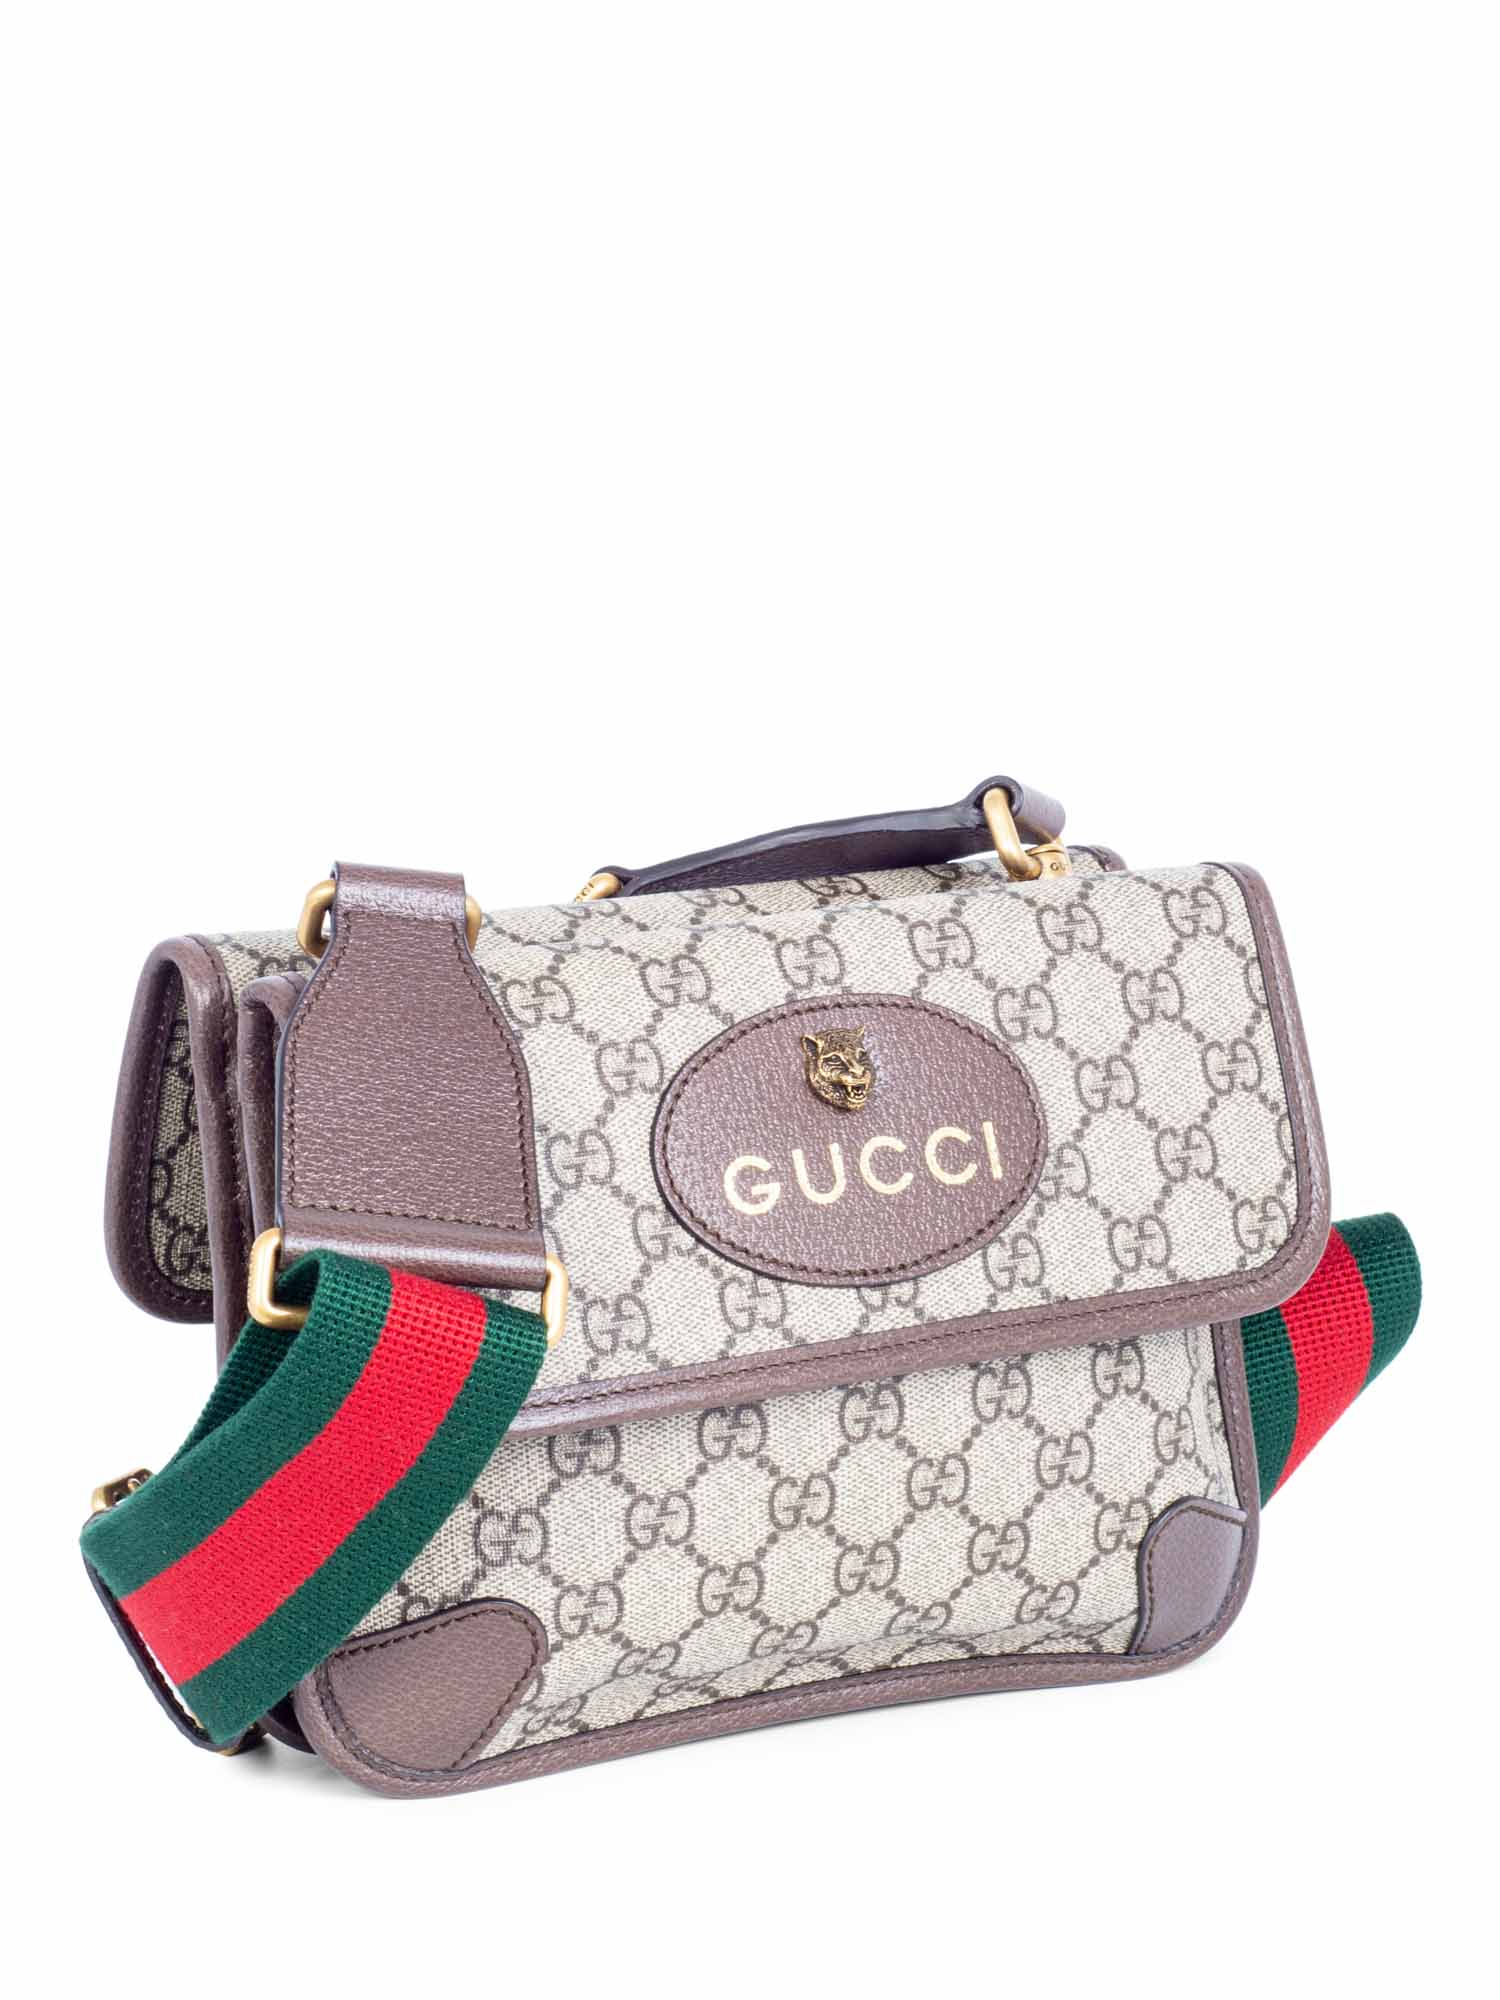 How To Authenticate A Gucci Bag In Steps